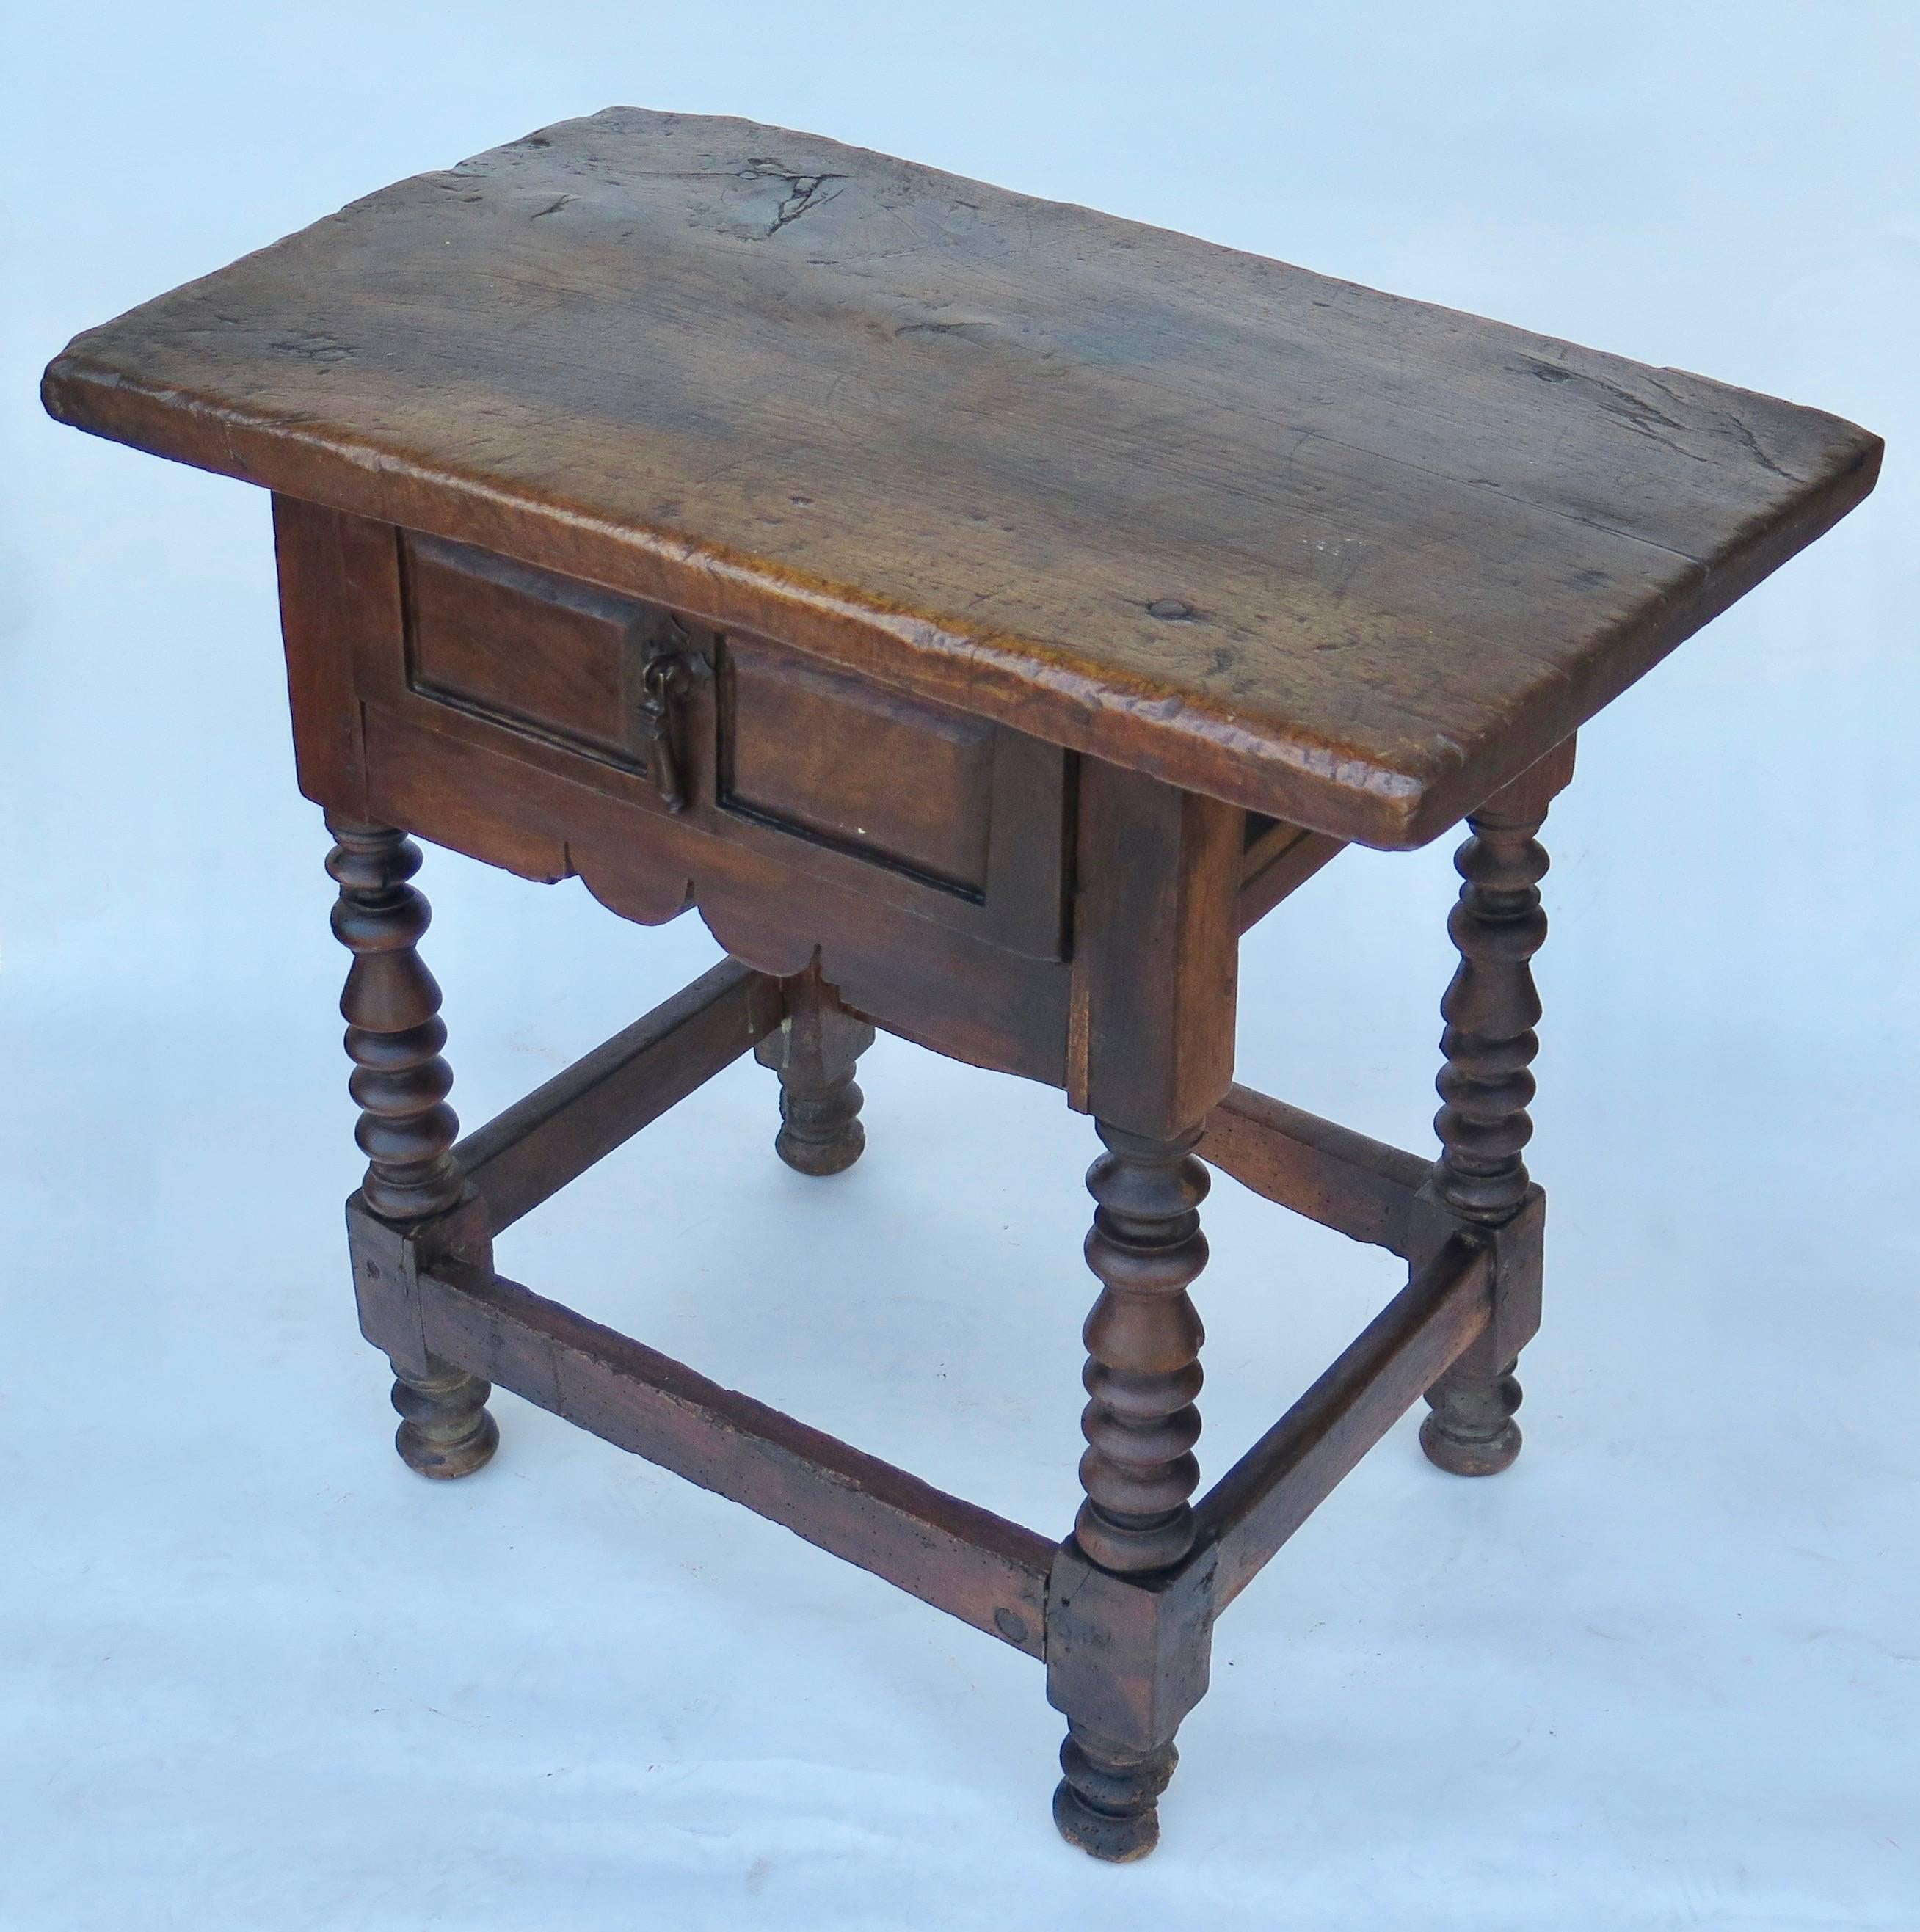 Excellent early Spanish side table with turned legs and single plank top.